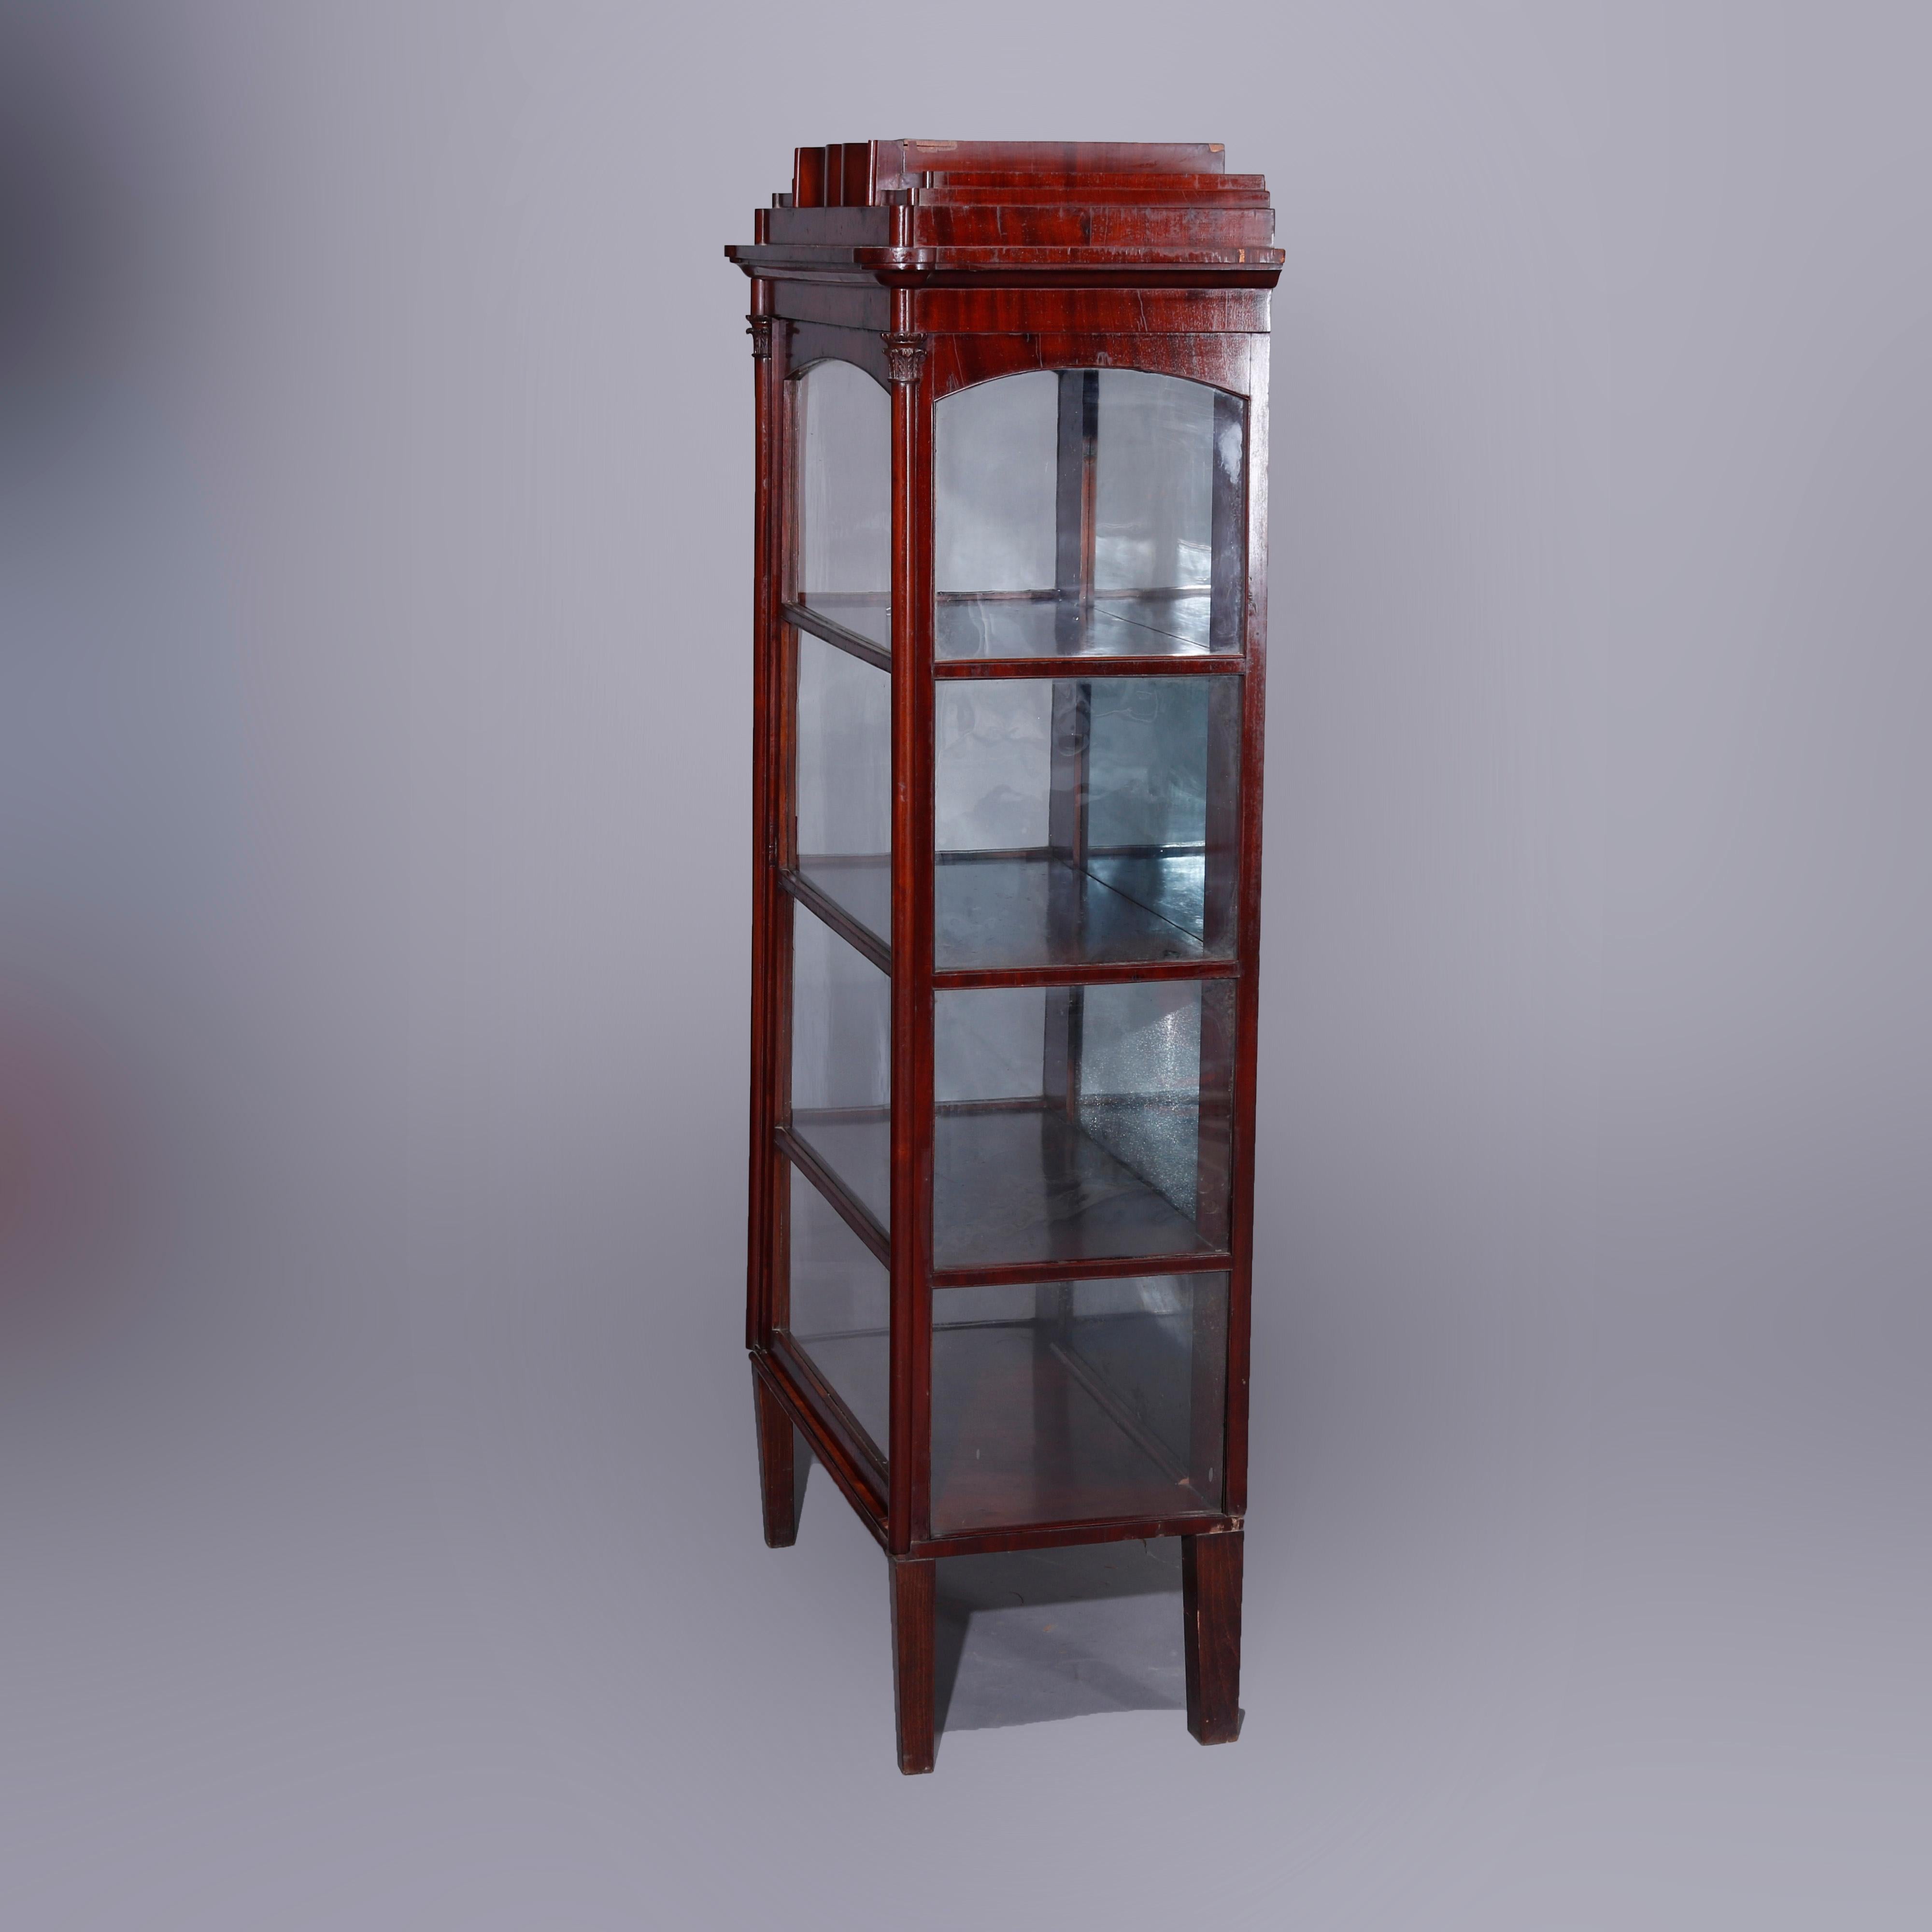 An antique Second American Empire neoclassical vitrine or china cabinet offer flame mahogany construction with stepped crest surmounting case with single glass door opening to a mirrored and shelved interior and flanked by Corinthian column